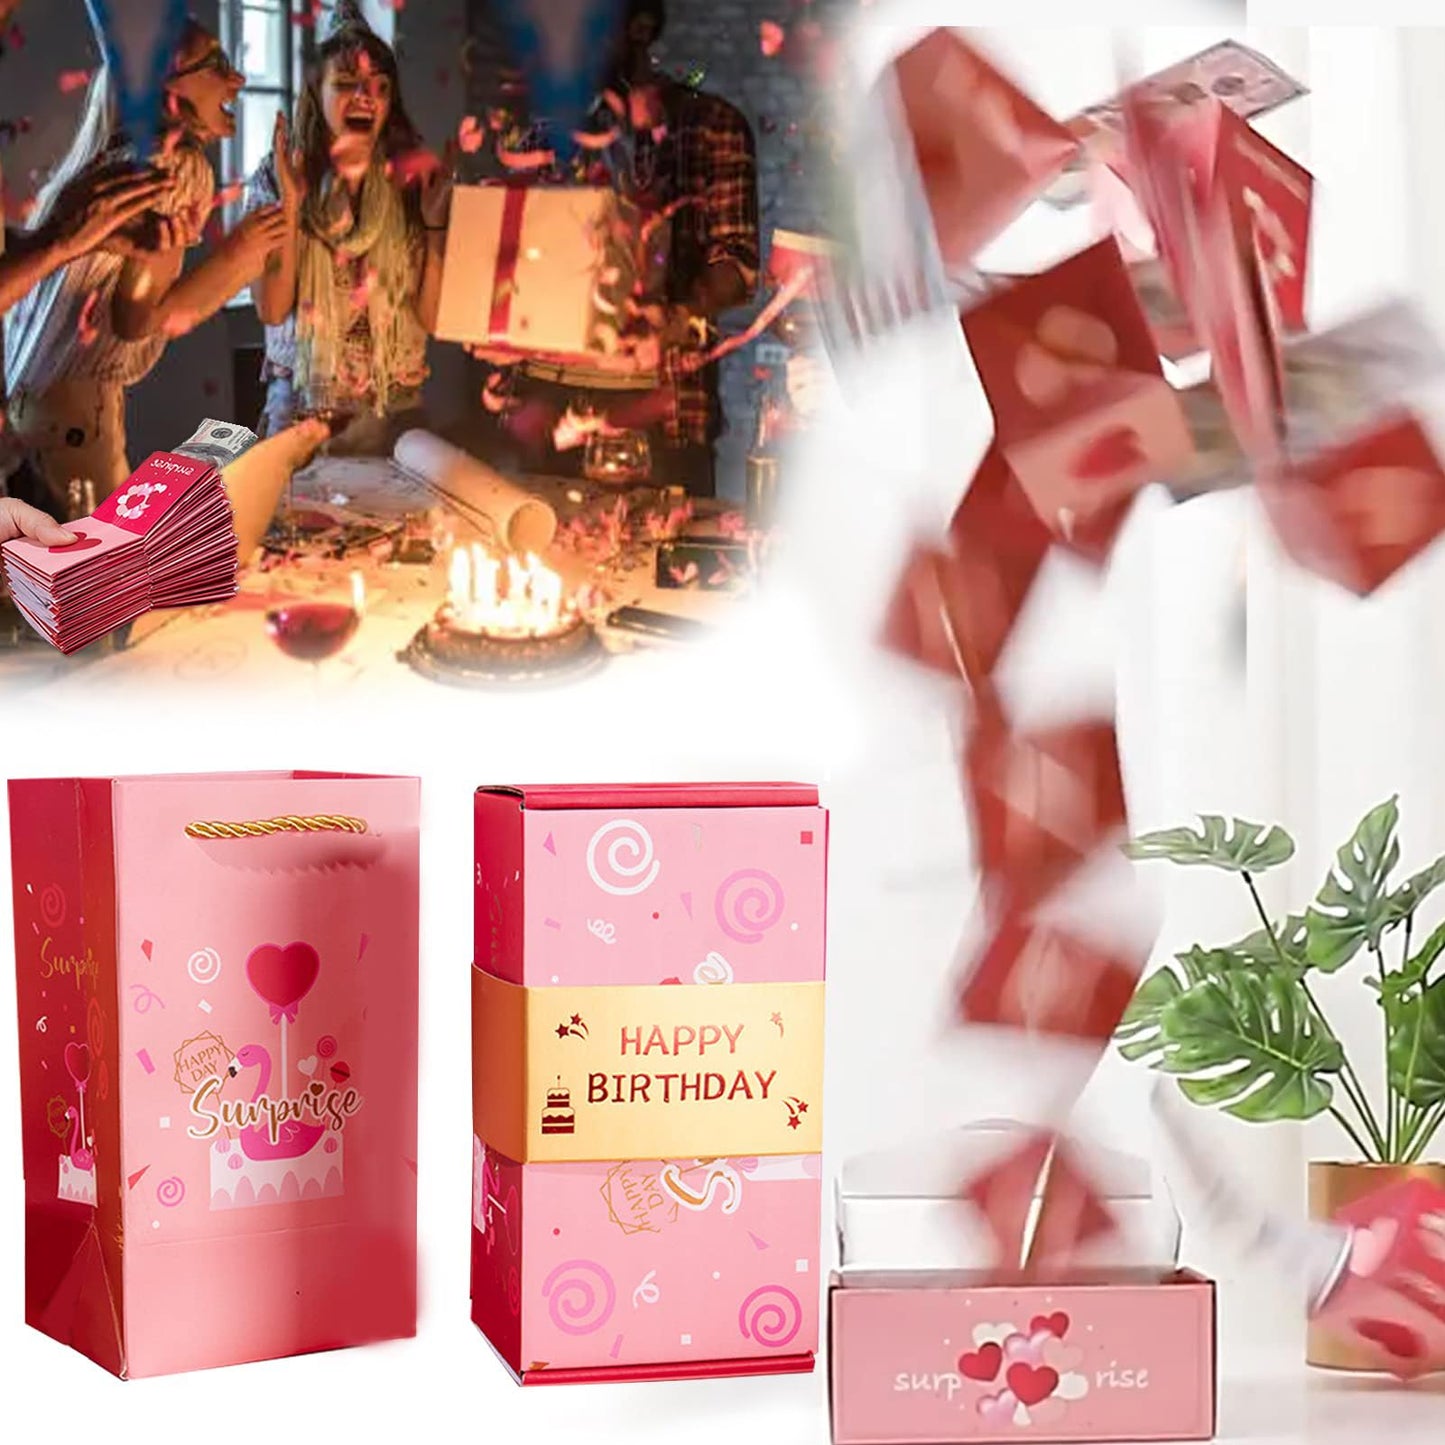 Pop-Up Surprise Explosion Gift Box